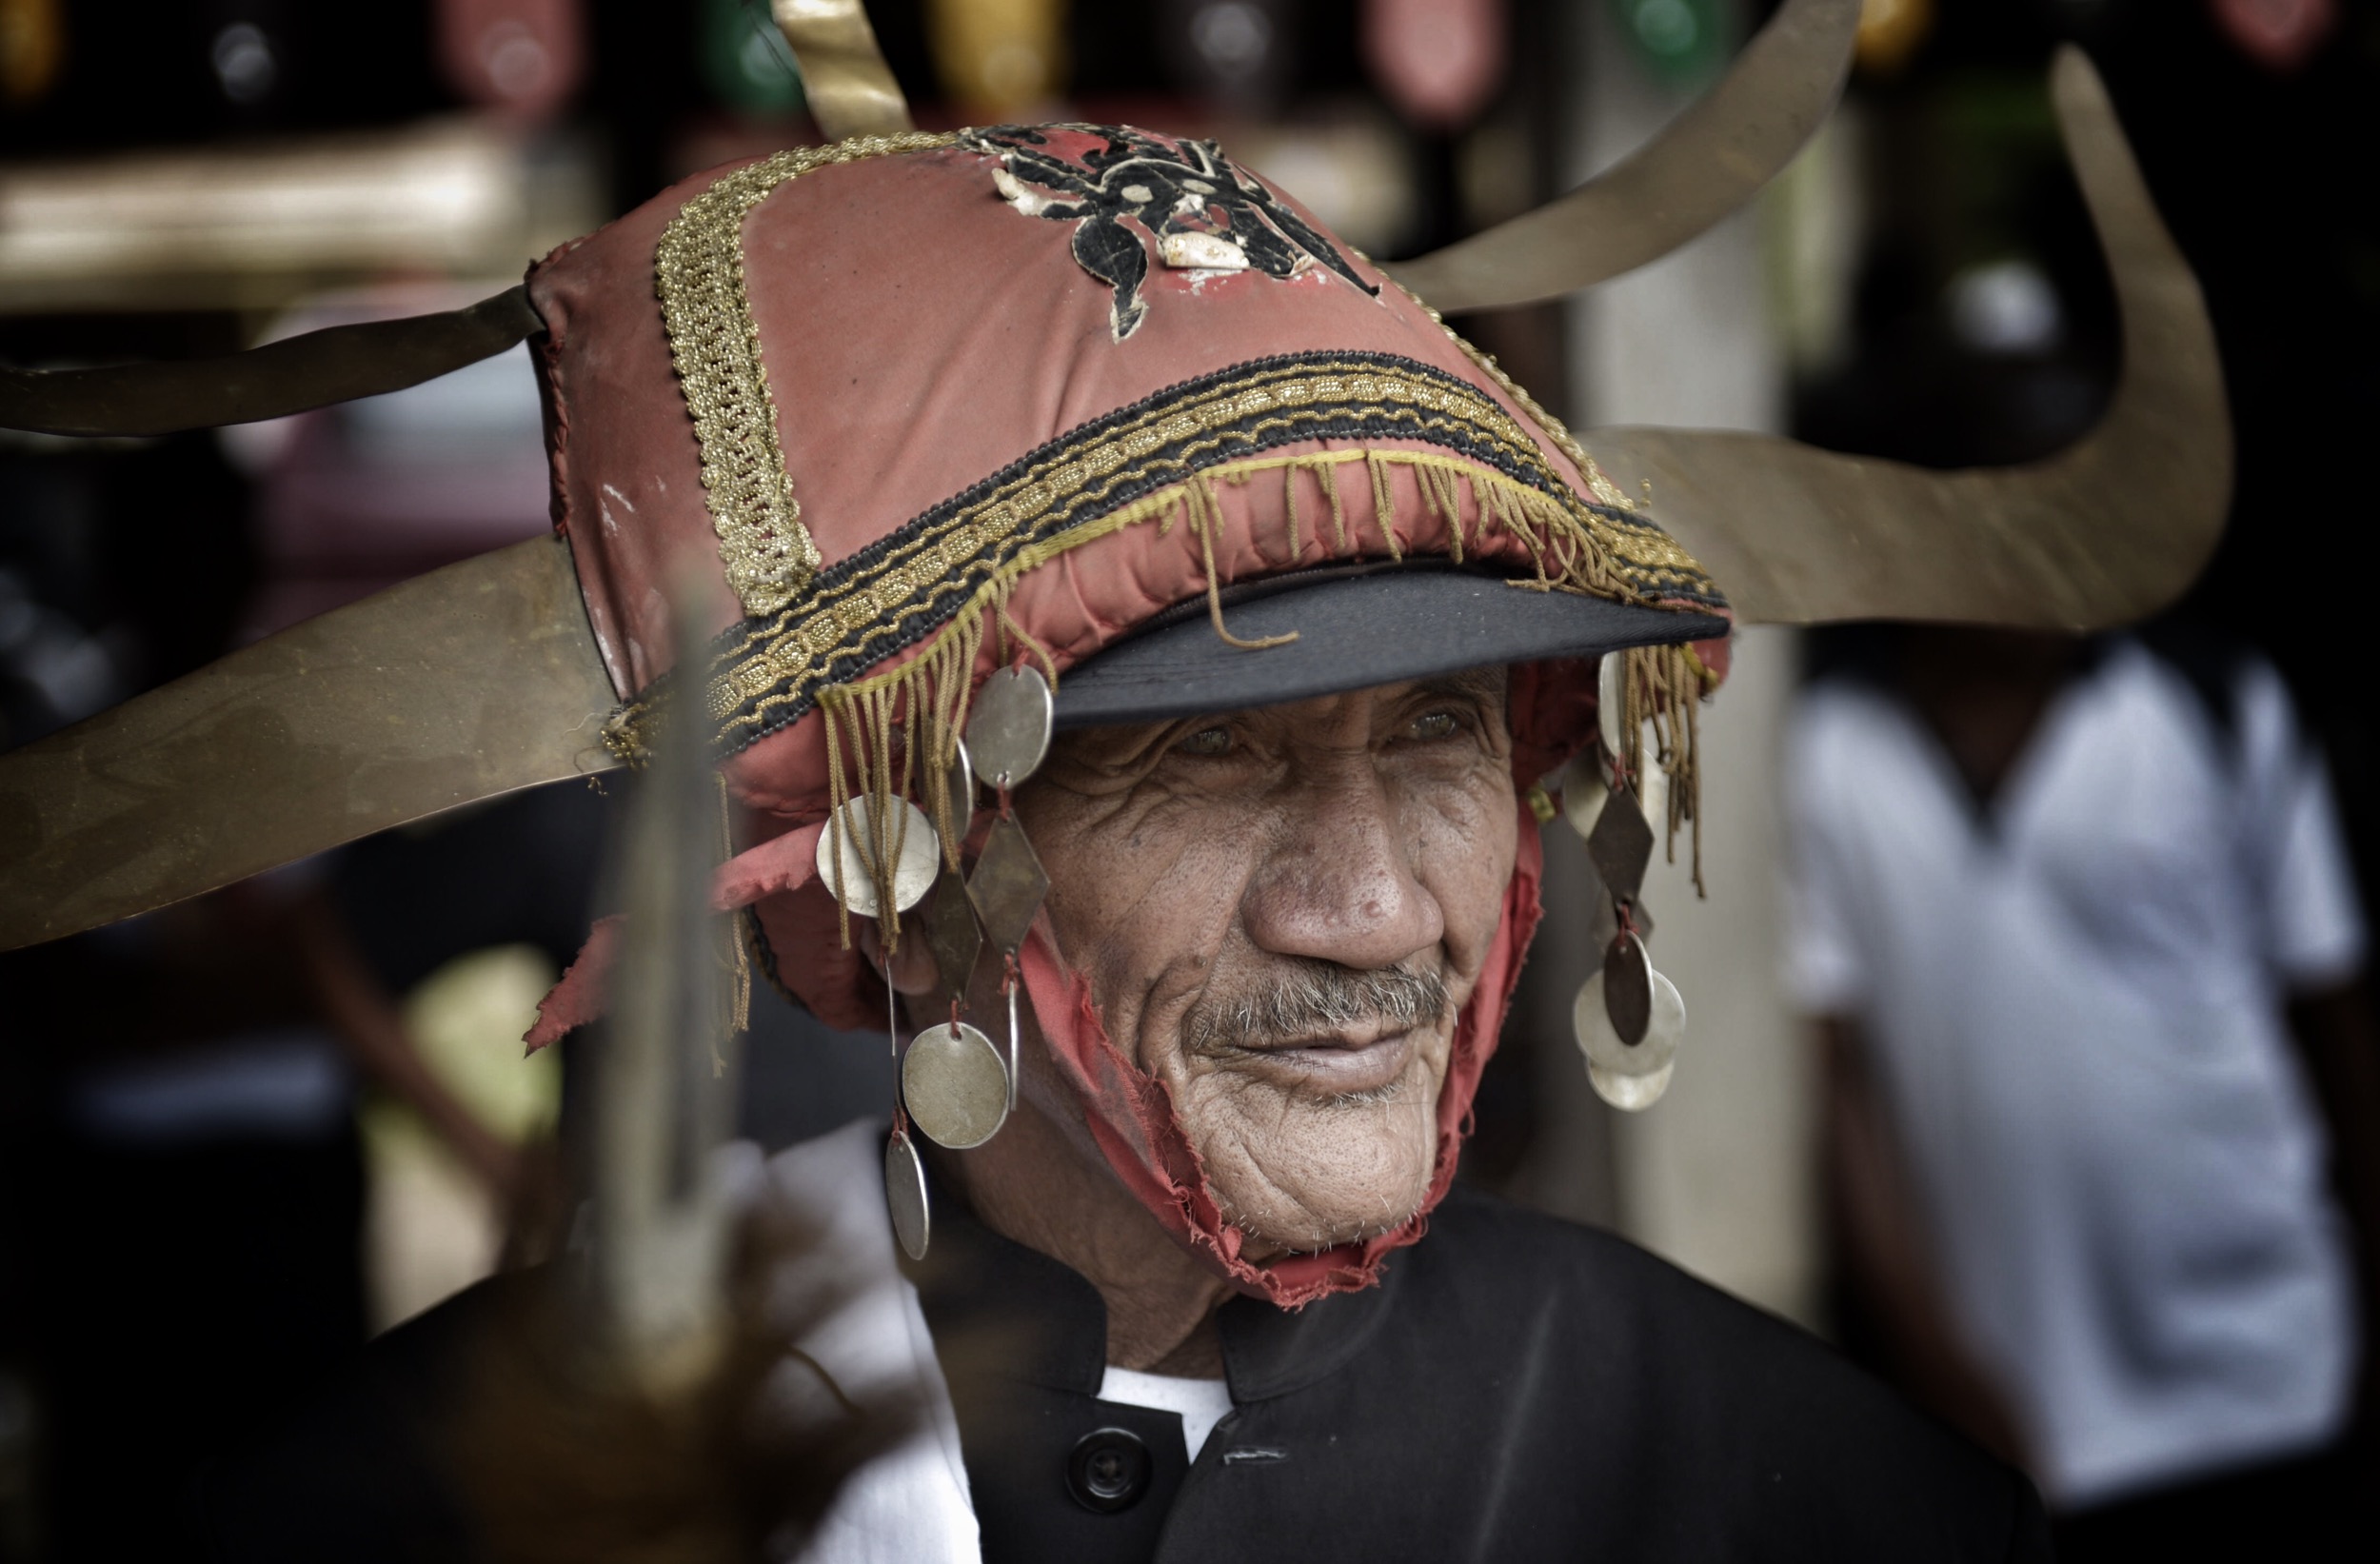 Wallpaper, Indonesia, costume, Asia, traditional, ceremony, Funeral, warrior, sulawesi, toraja, puangmtallorerung 2500x1643